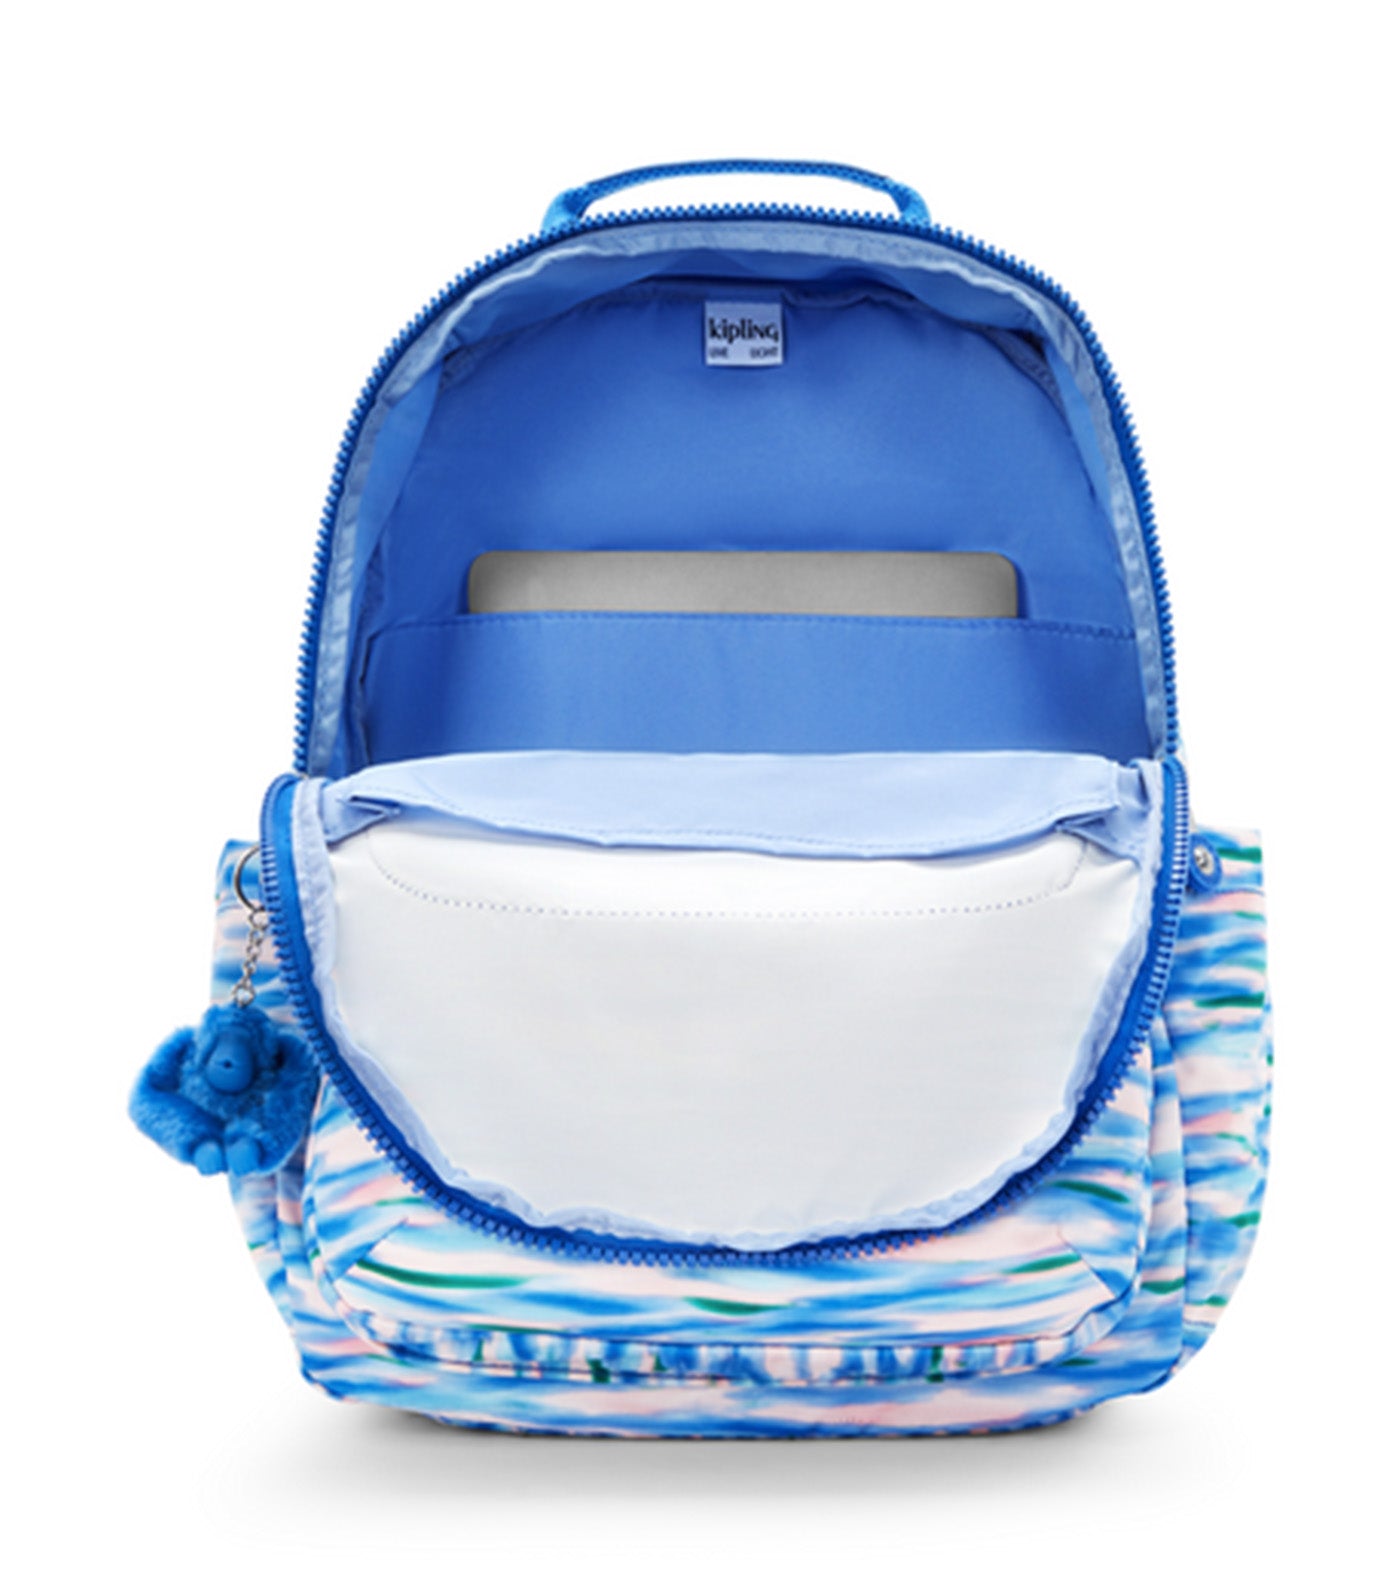 Seoul Backpack Diluted Blue